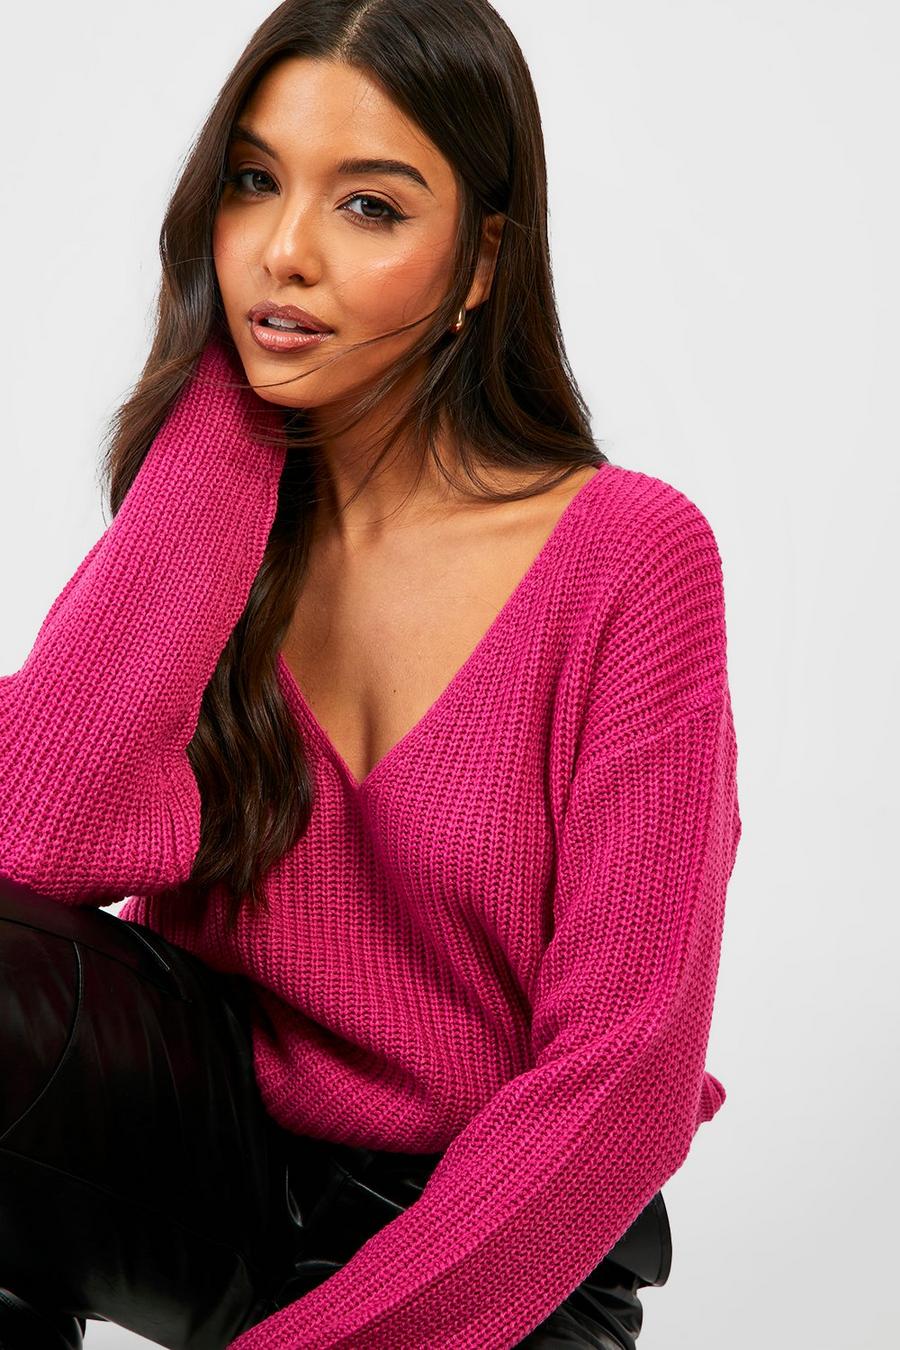 Buy Bright Pink Crew Neck Jumper 12, Jumpers